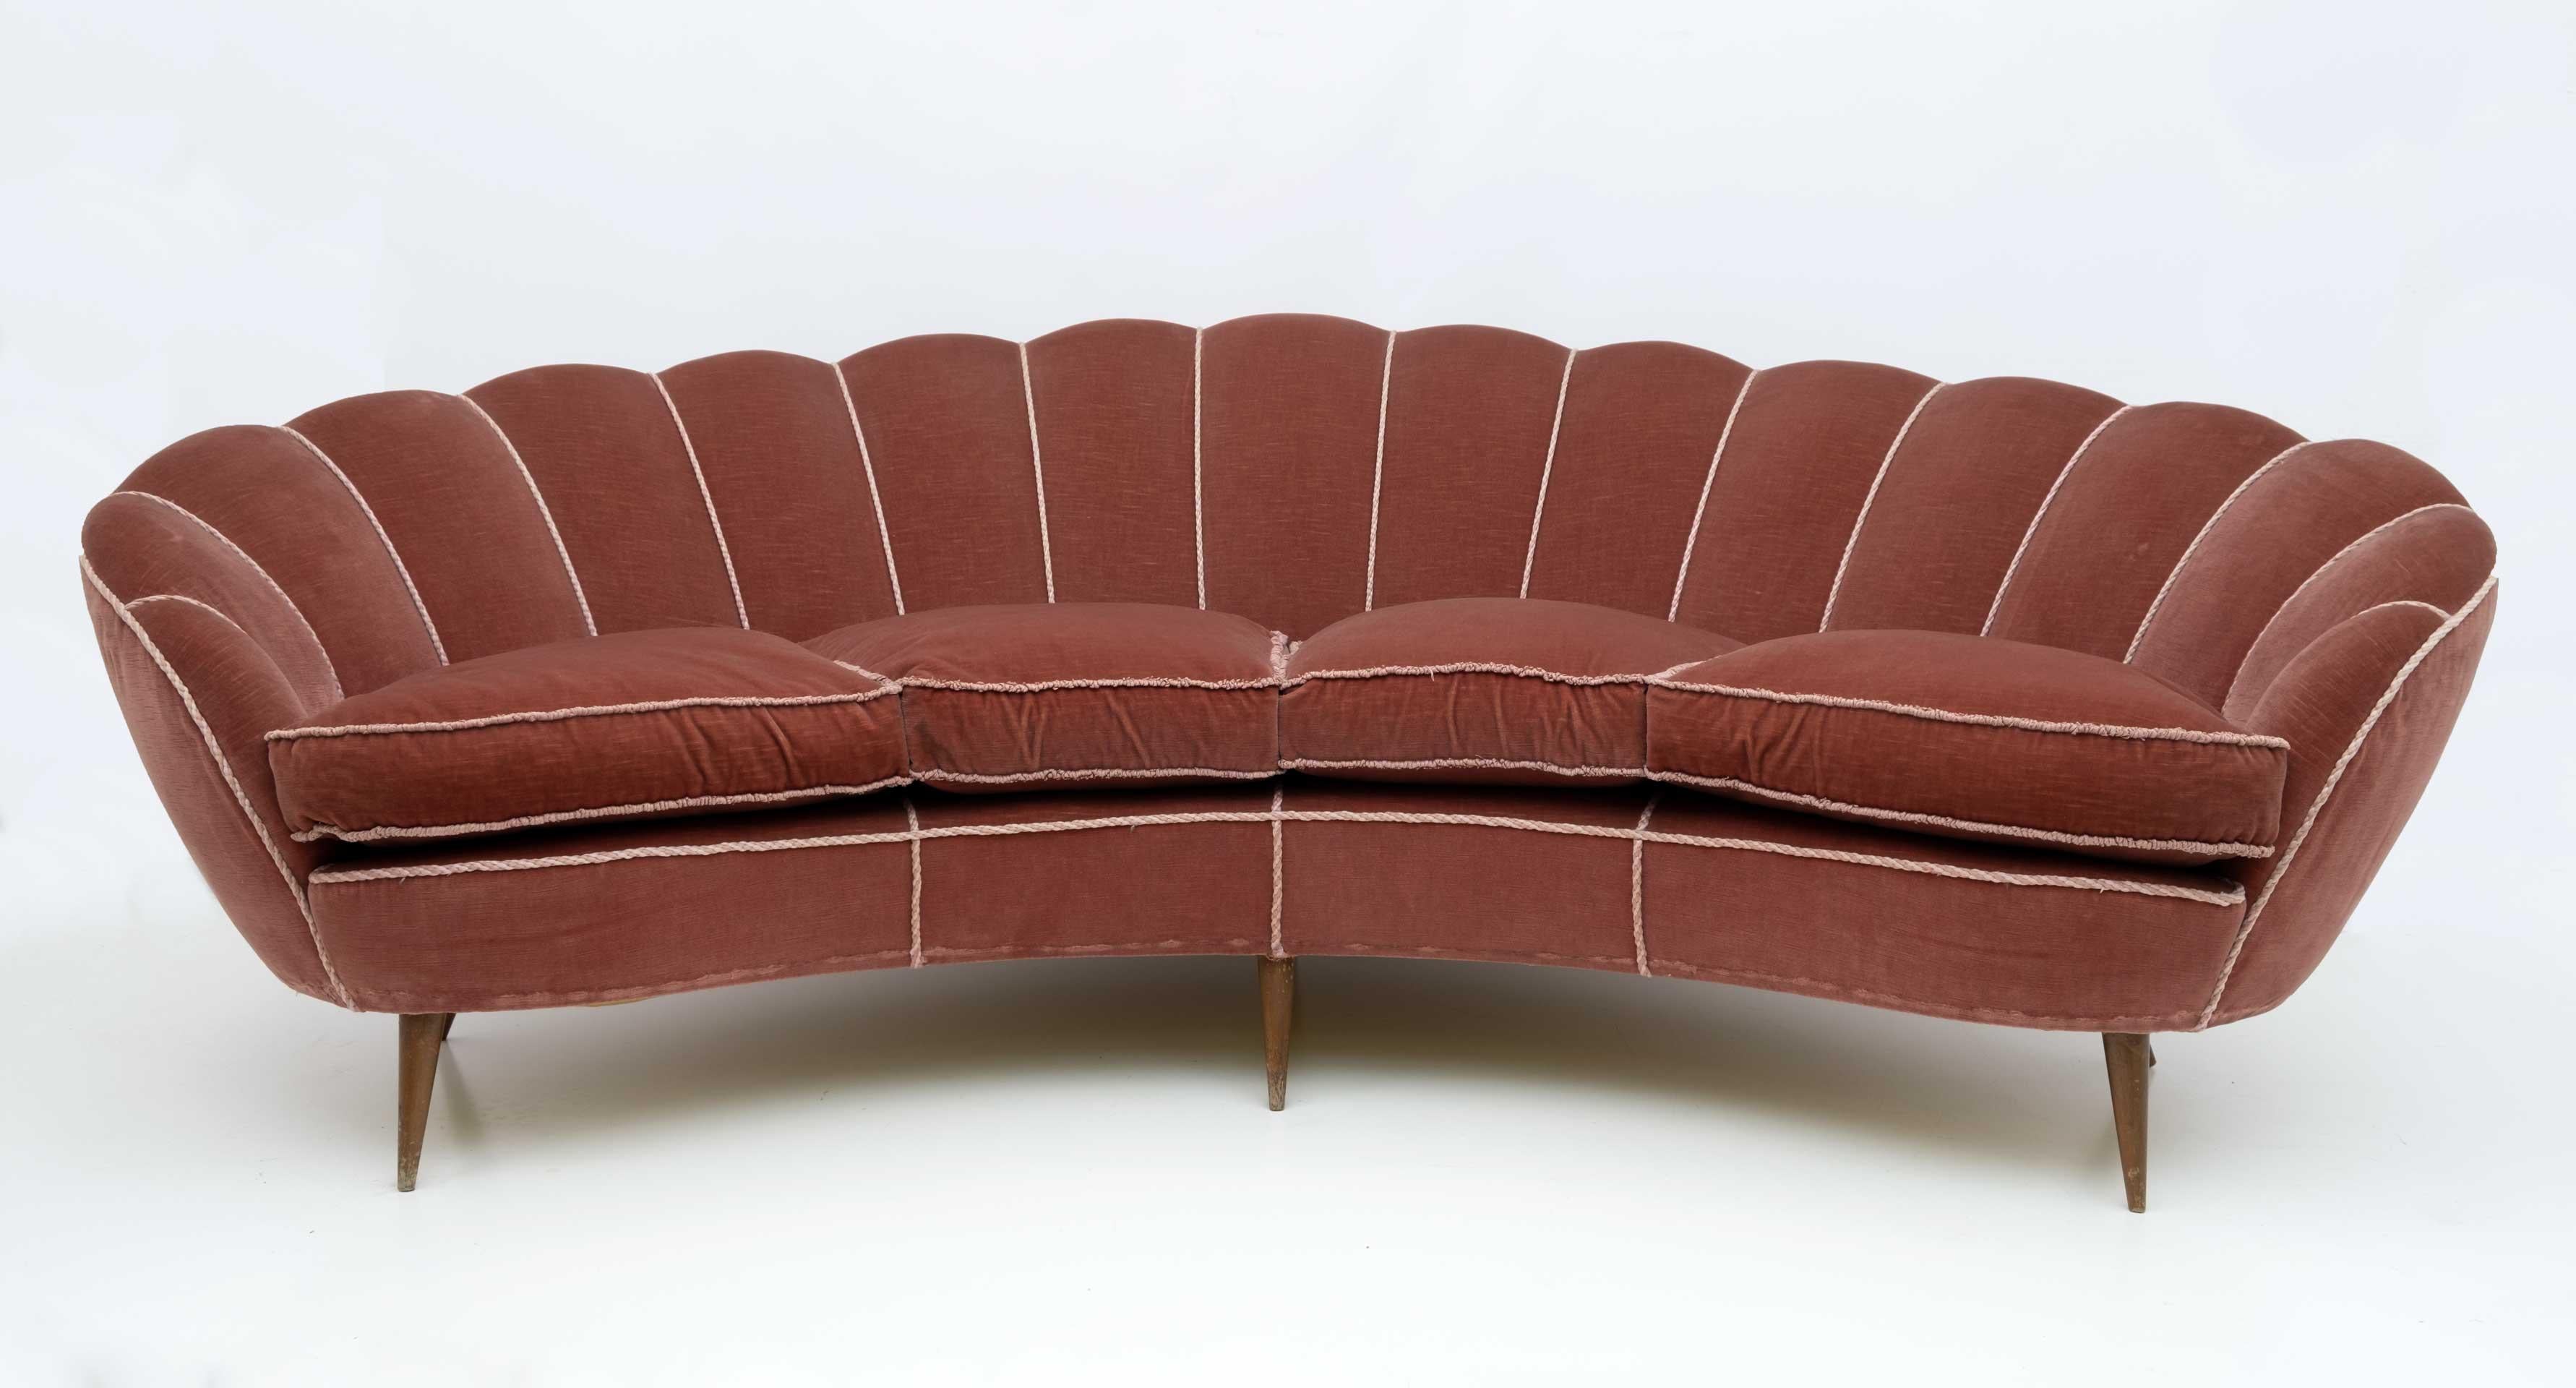 Daisy model sofa with wide and comfortable backrest, conical beech foot, good condition of the padding, goose down cushions.
The velvet is original from the period but a new upholstery is recommended.
Attributed Gio Ponti and produced by ISA-BERGAMO